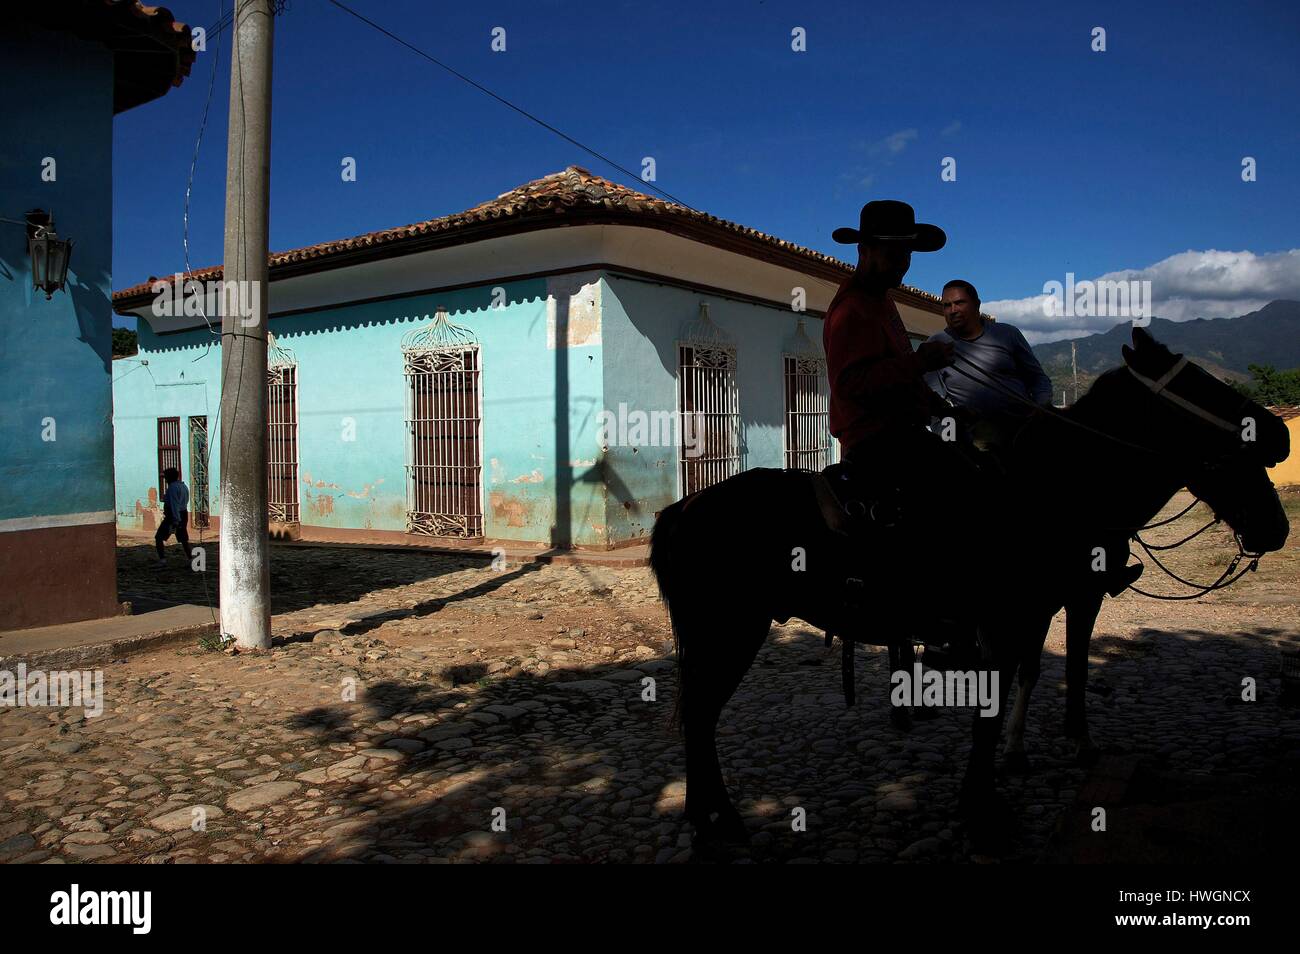 Cuba, province of Sancti Spiritus, Trinidad de Cuba, World heritage of UNESCO, shadow of a cavalier with hat in front of colonial colourful houses Stock Photo